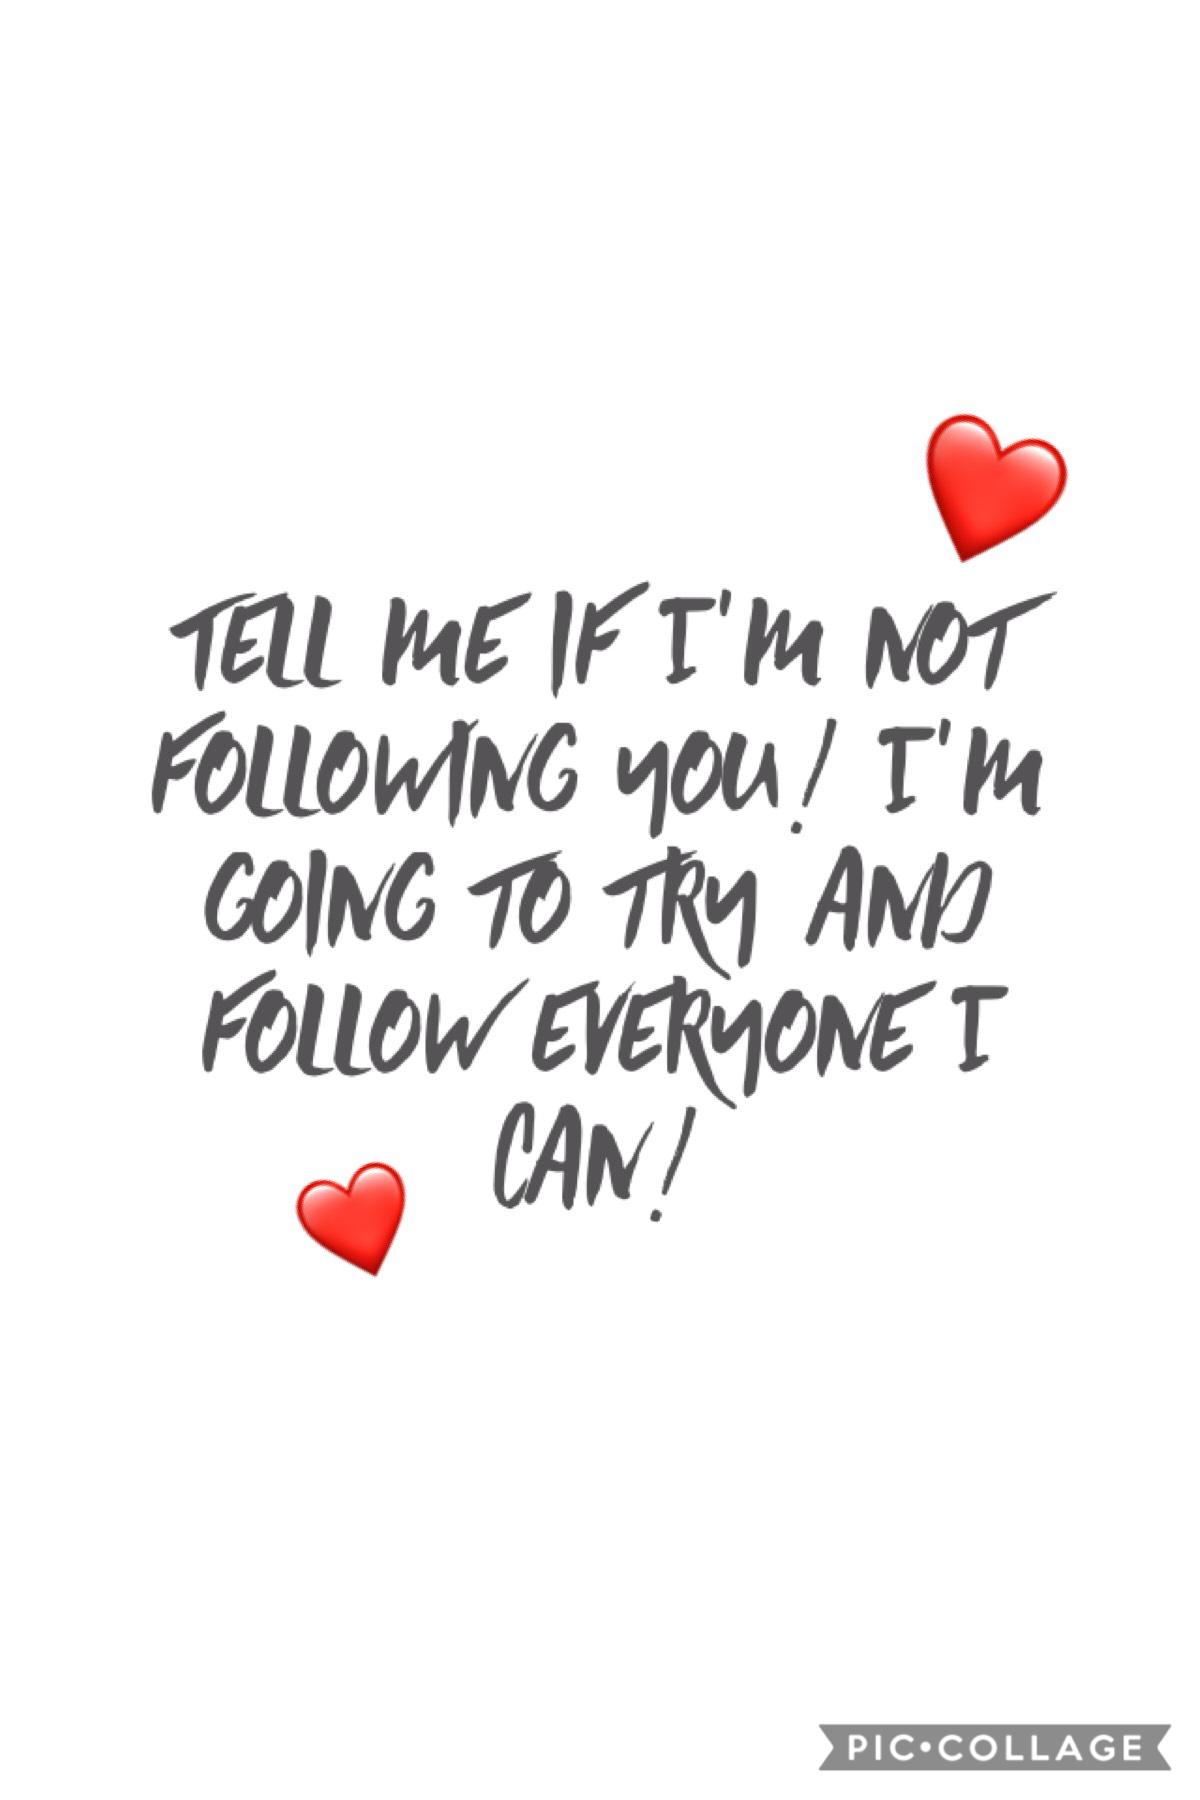 -TELL ME IF IM NOT FOLLOWING YOU!